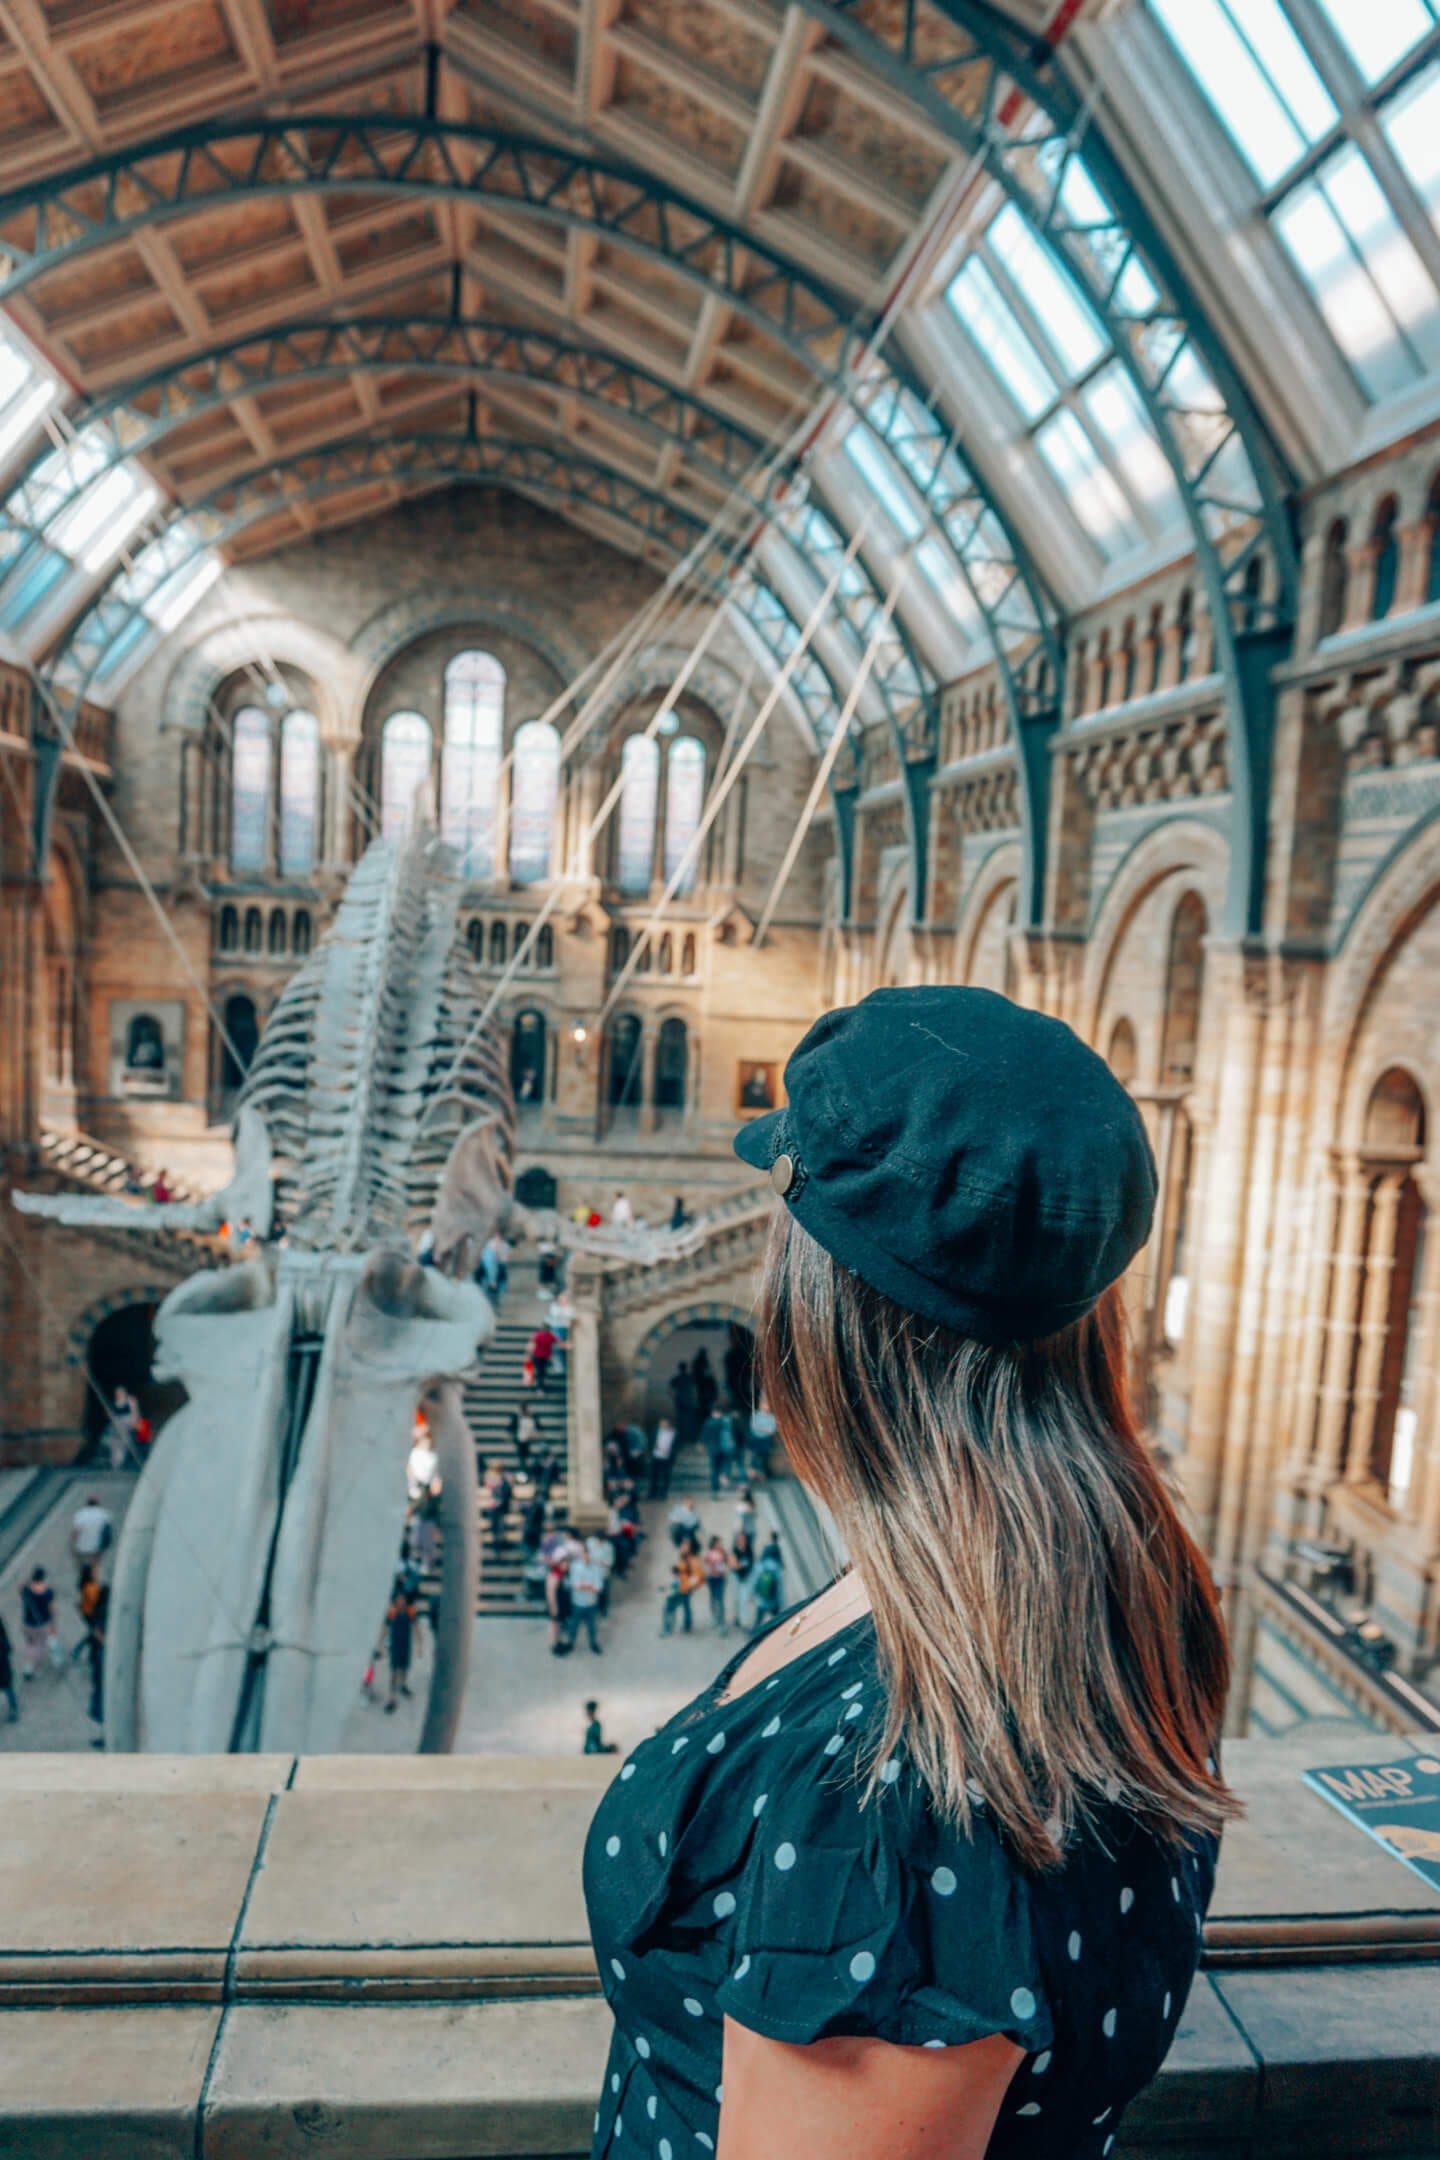 A girl wearing a black hat looks out at a skeleton of a whale in the British Museum in London